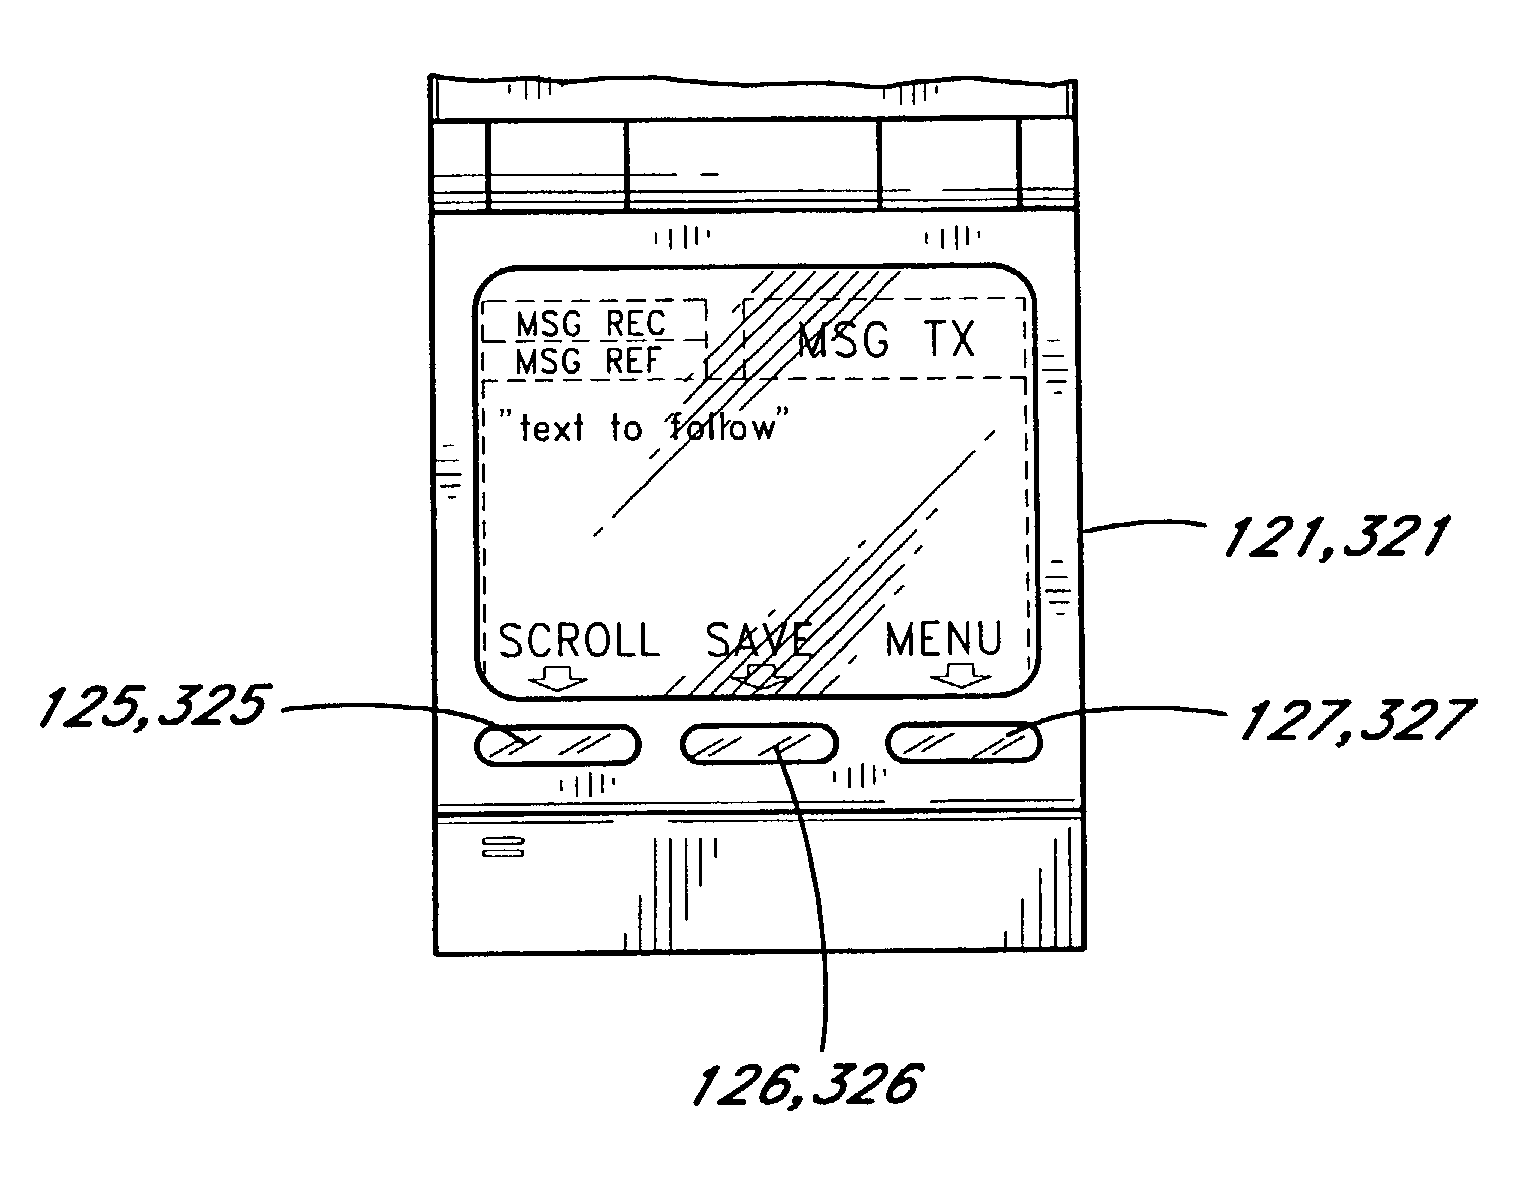 Personal communicator with flip element display